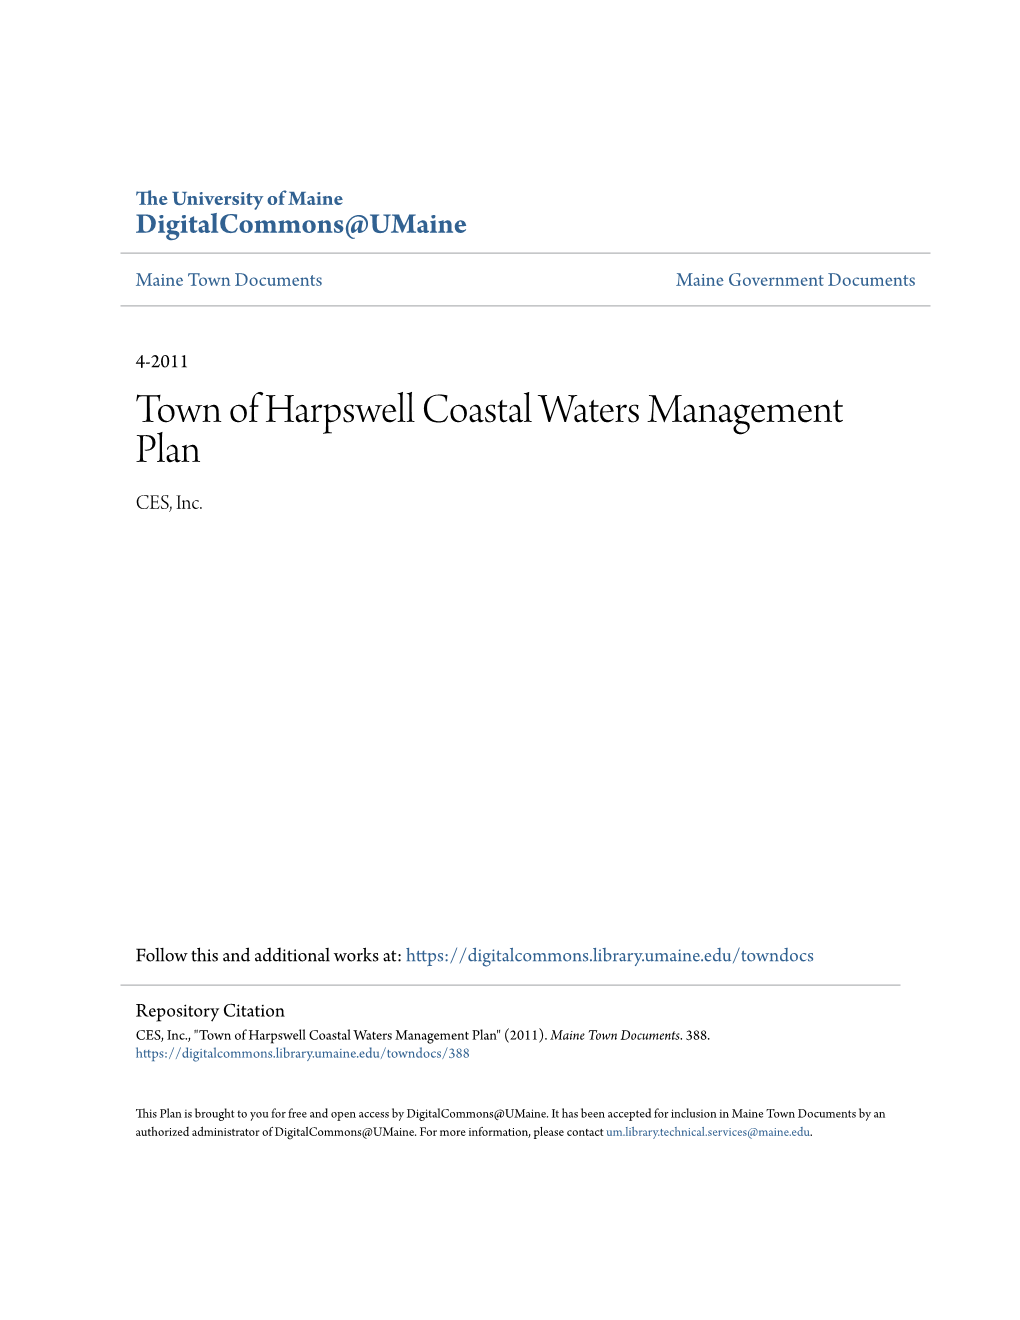 Town of Harpswell Coastal Waters Management Plan CES, Inc